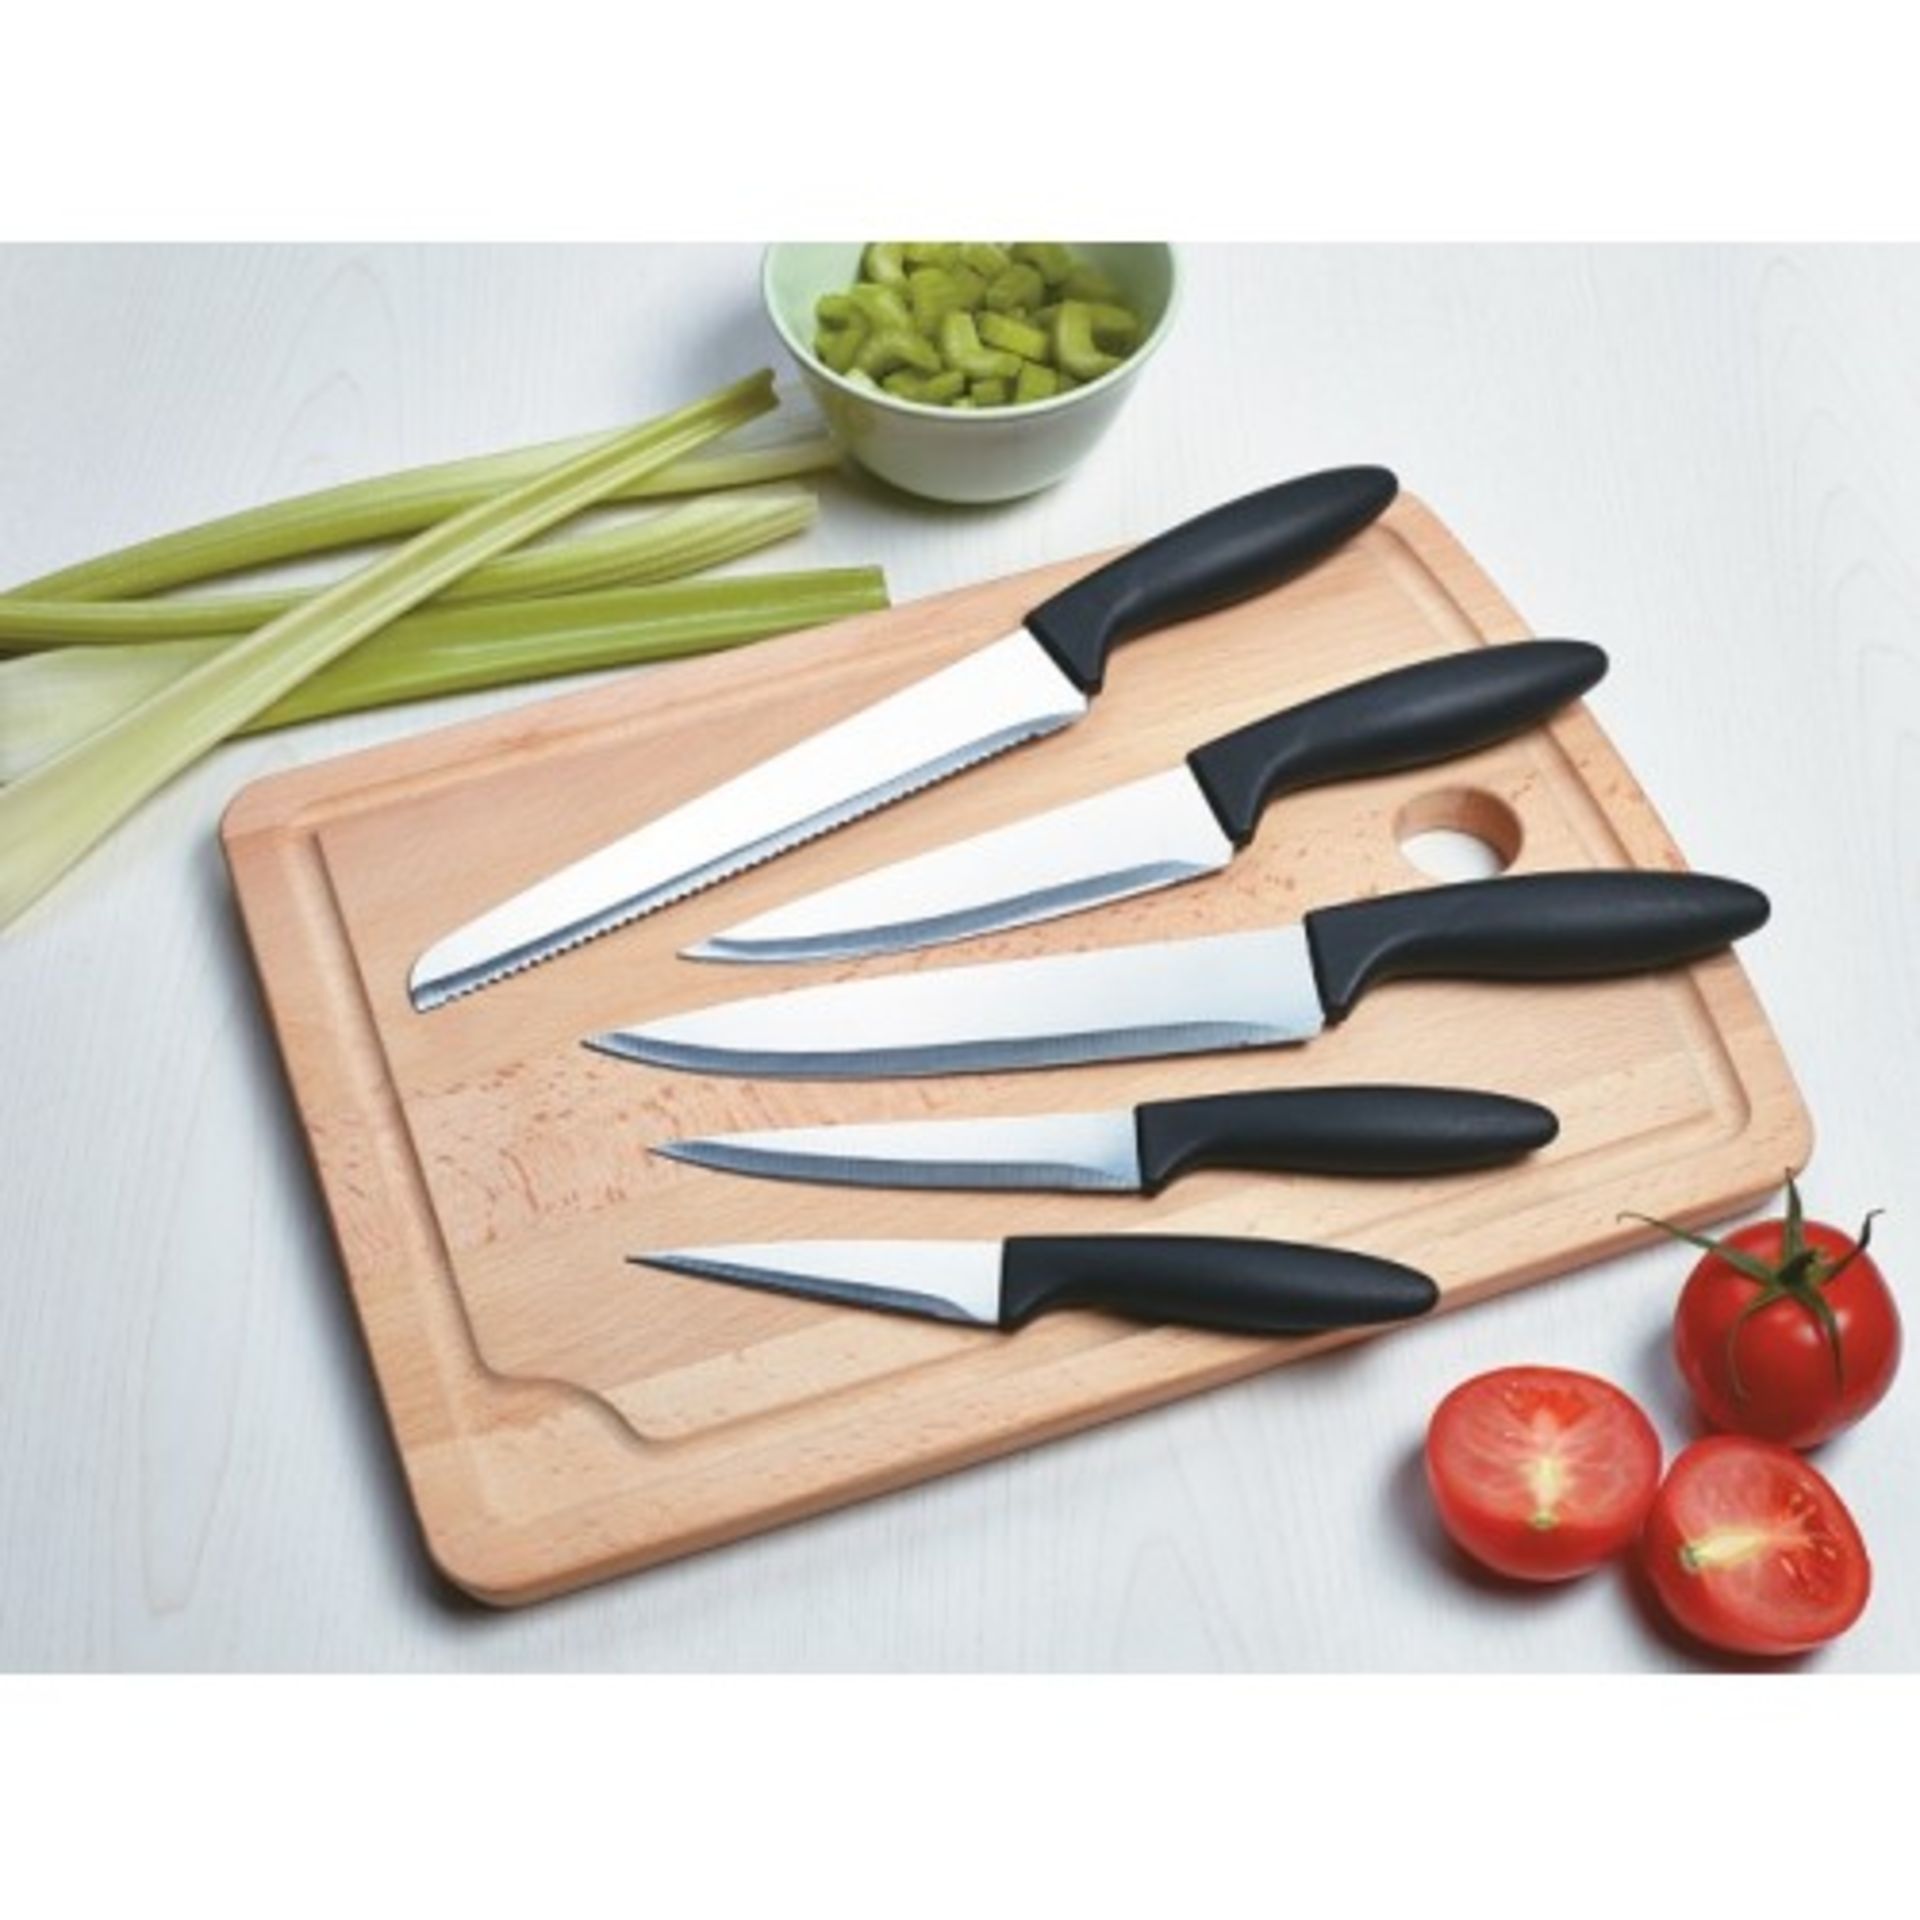 V *TRADE QTY* Brand New A Set Of Five Stainless Steel Knives With Black Handles-Two Chef Knives-